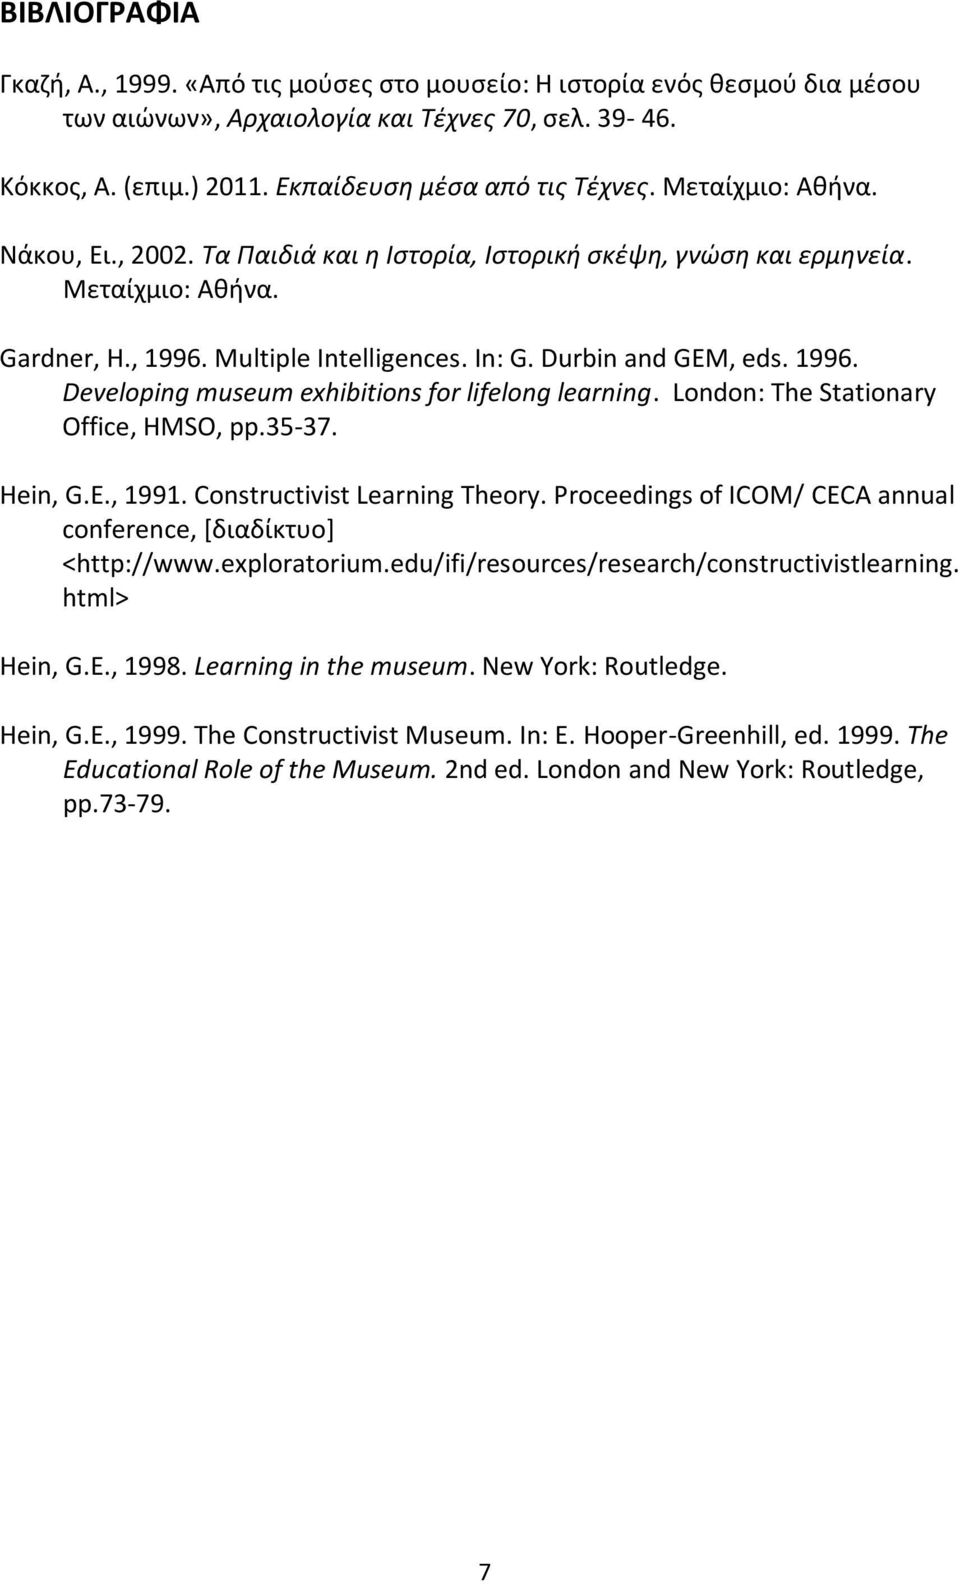 London: The Stationary Office, HMSO, pp.35-37. Hein, G.E., 1991. Constructivist Learning Theory. Proceedings of ICOM/ CECA annual conference, [διαδίκτυο] <http://www.exploratorium.